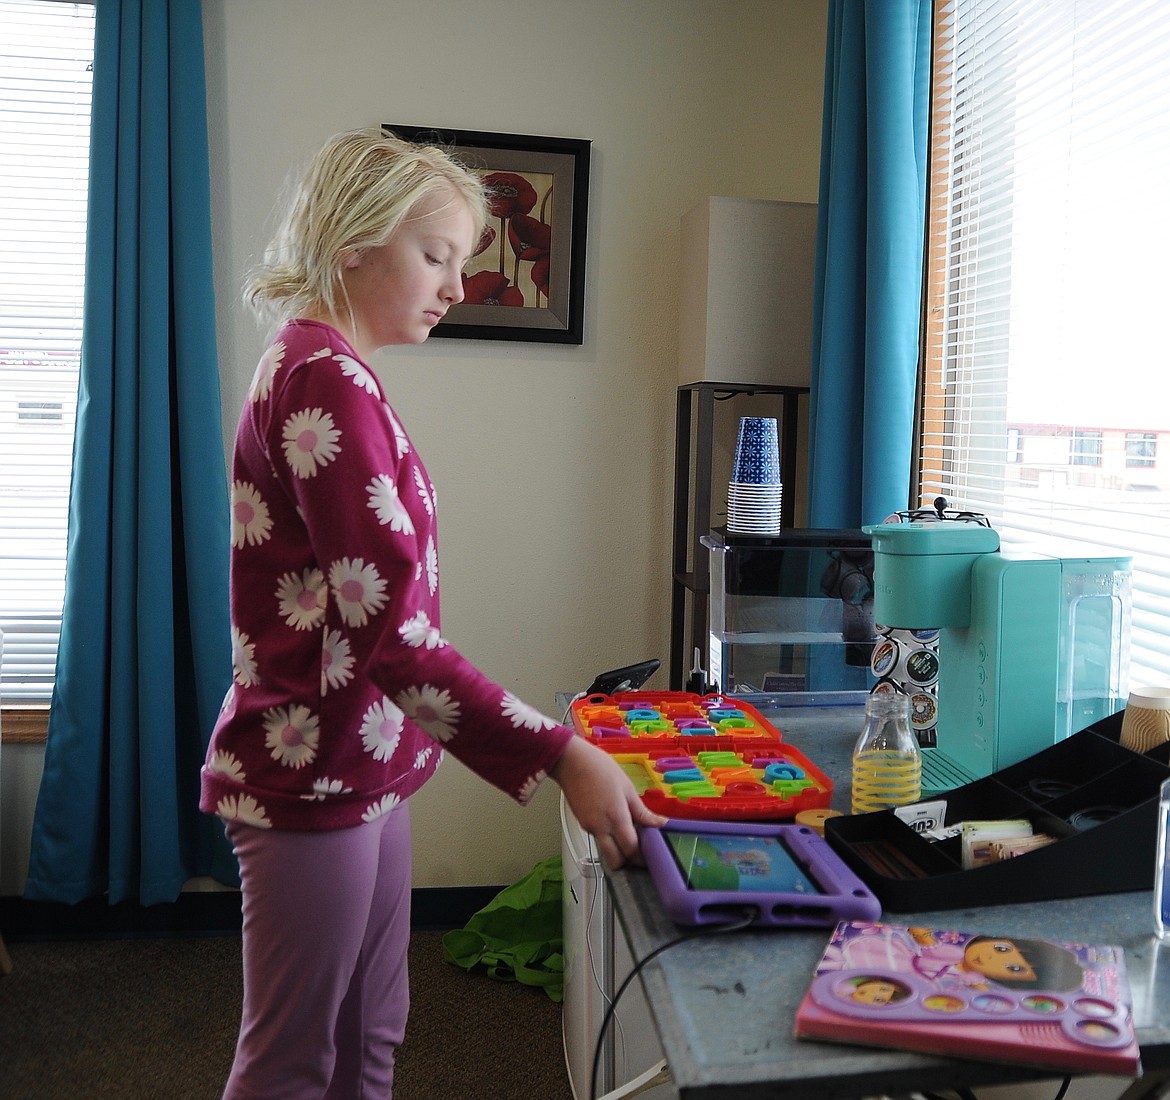 Nurtured Growth Learning Center student Rylee listens to music and organizes her space at the school Wednesday, Dec. 7, 2022. Her mother April Schottelkorb started the school to serve children with a variety of developmental, sensory and learning needs. (Hilary Matheson/Daily Inter Lake)